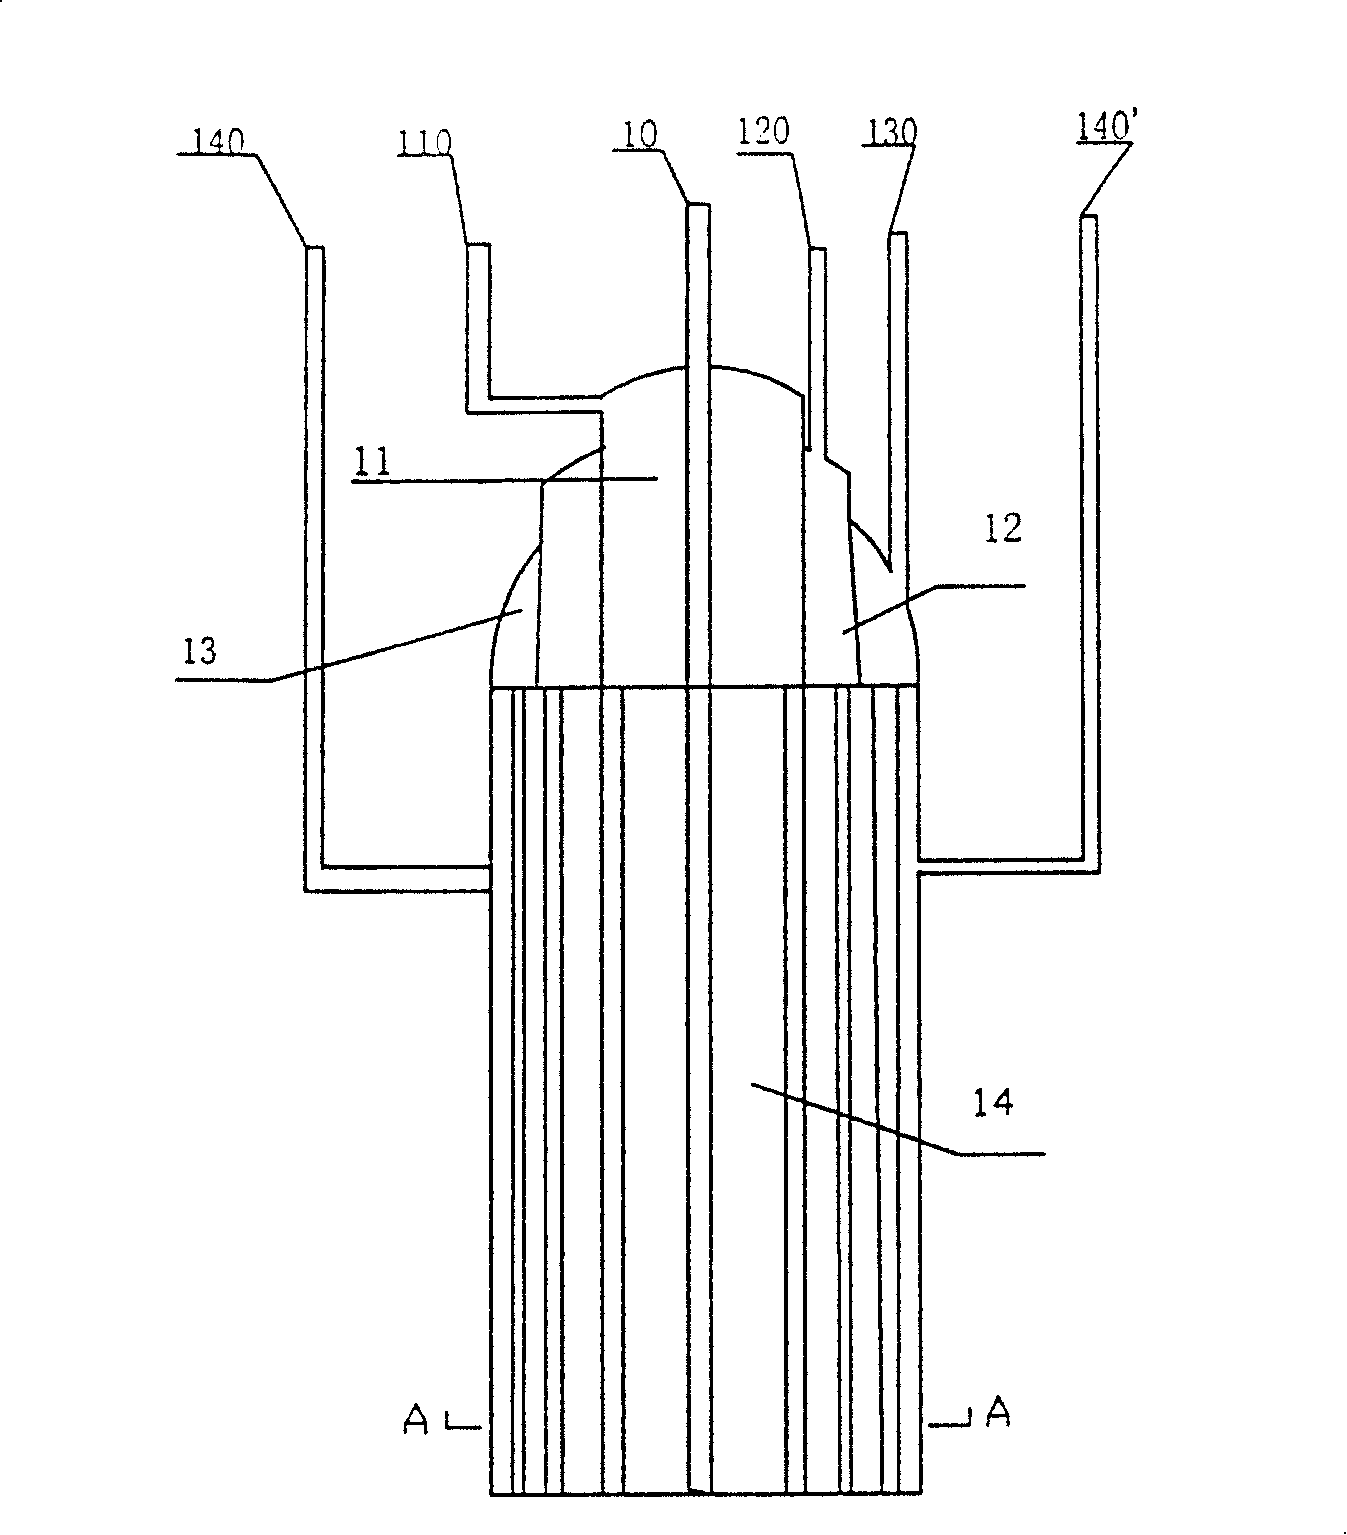 Process for synthesizing quartz glass by horizontal silicon tetrachloride vapor deposition